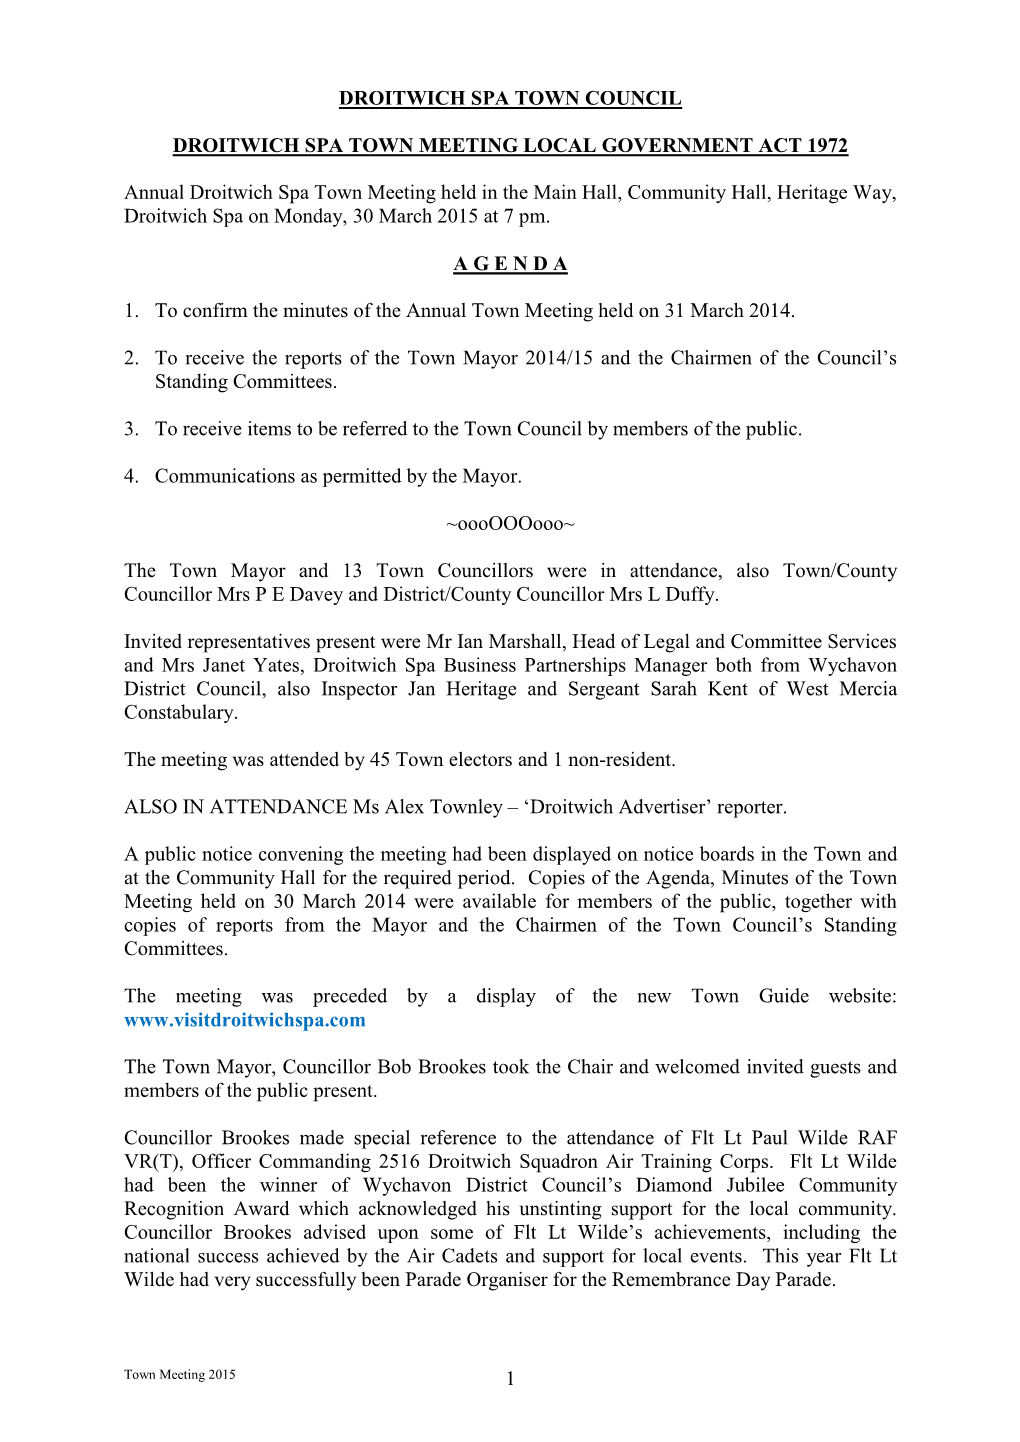 Minutes of the Annual Town Meeting Held on 31 March 2014